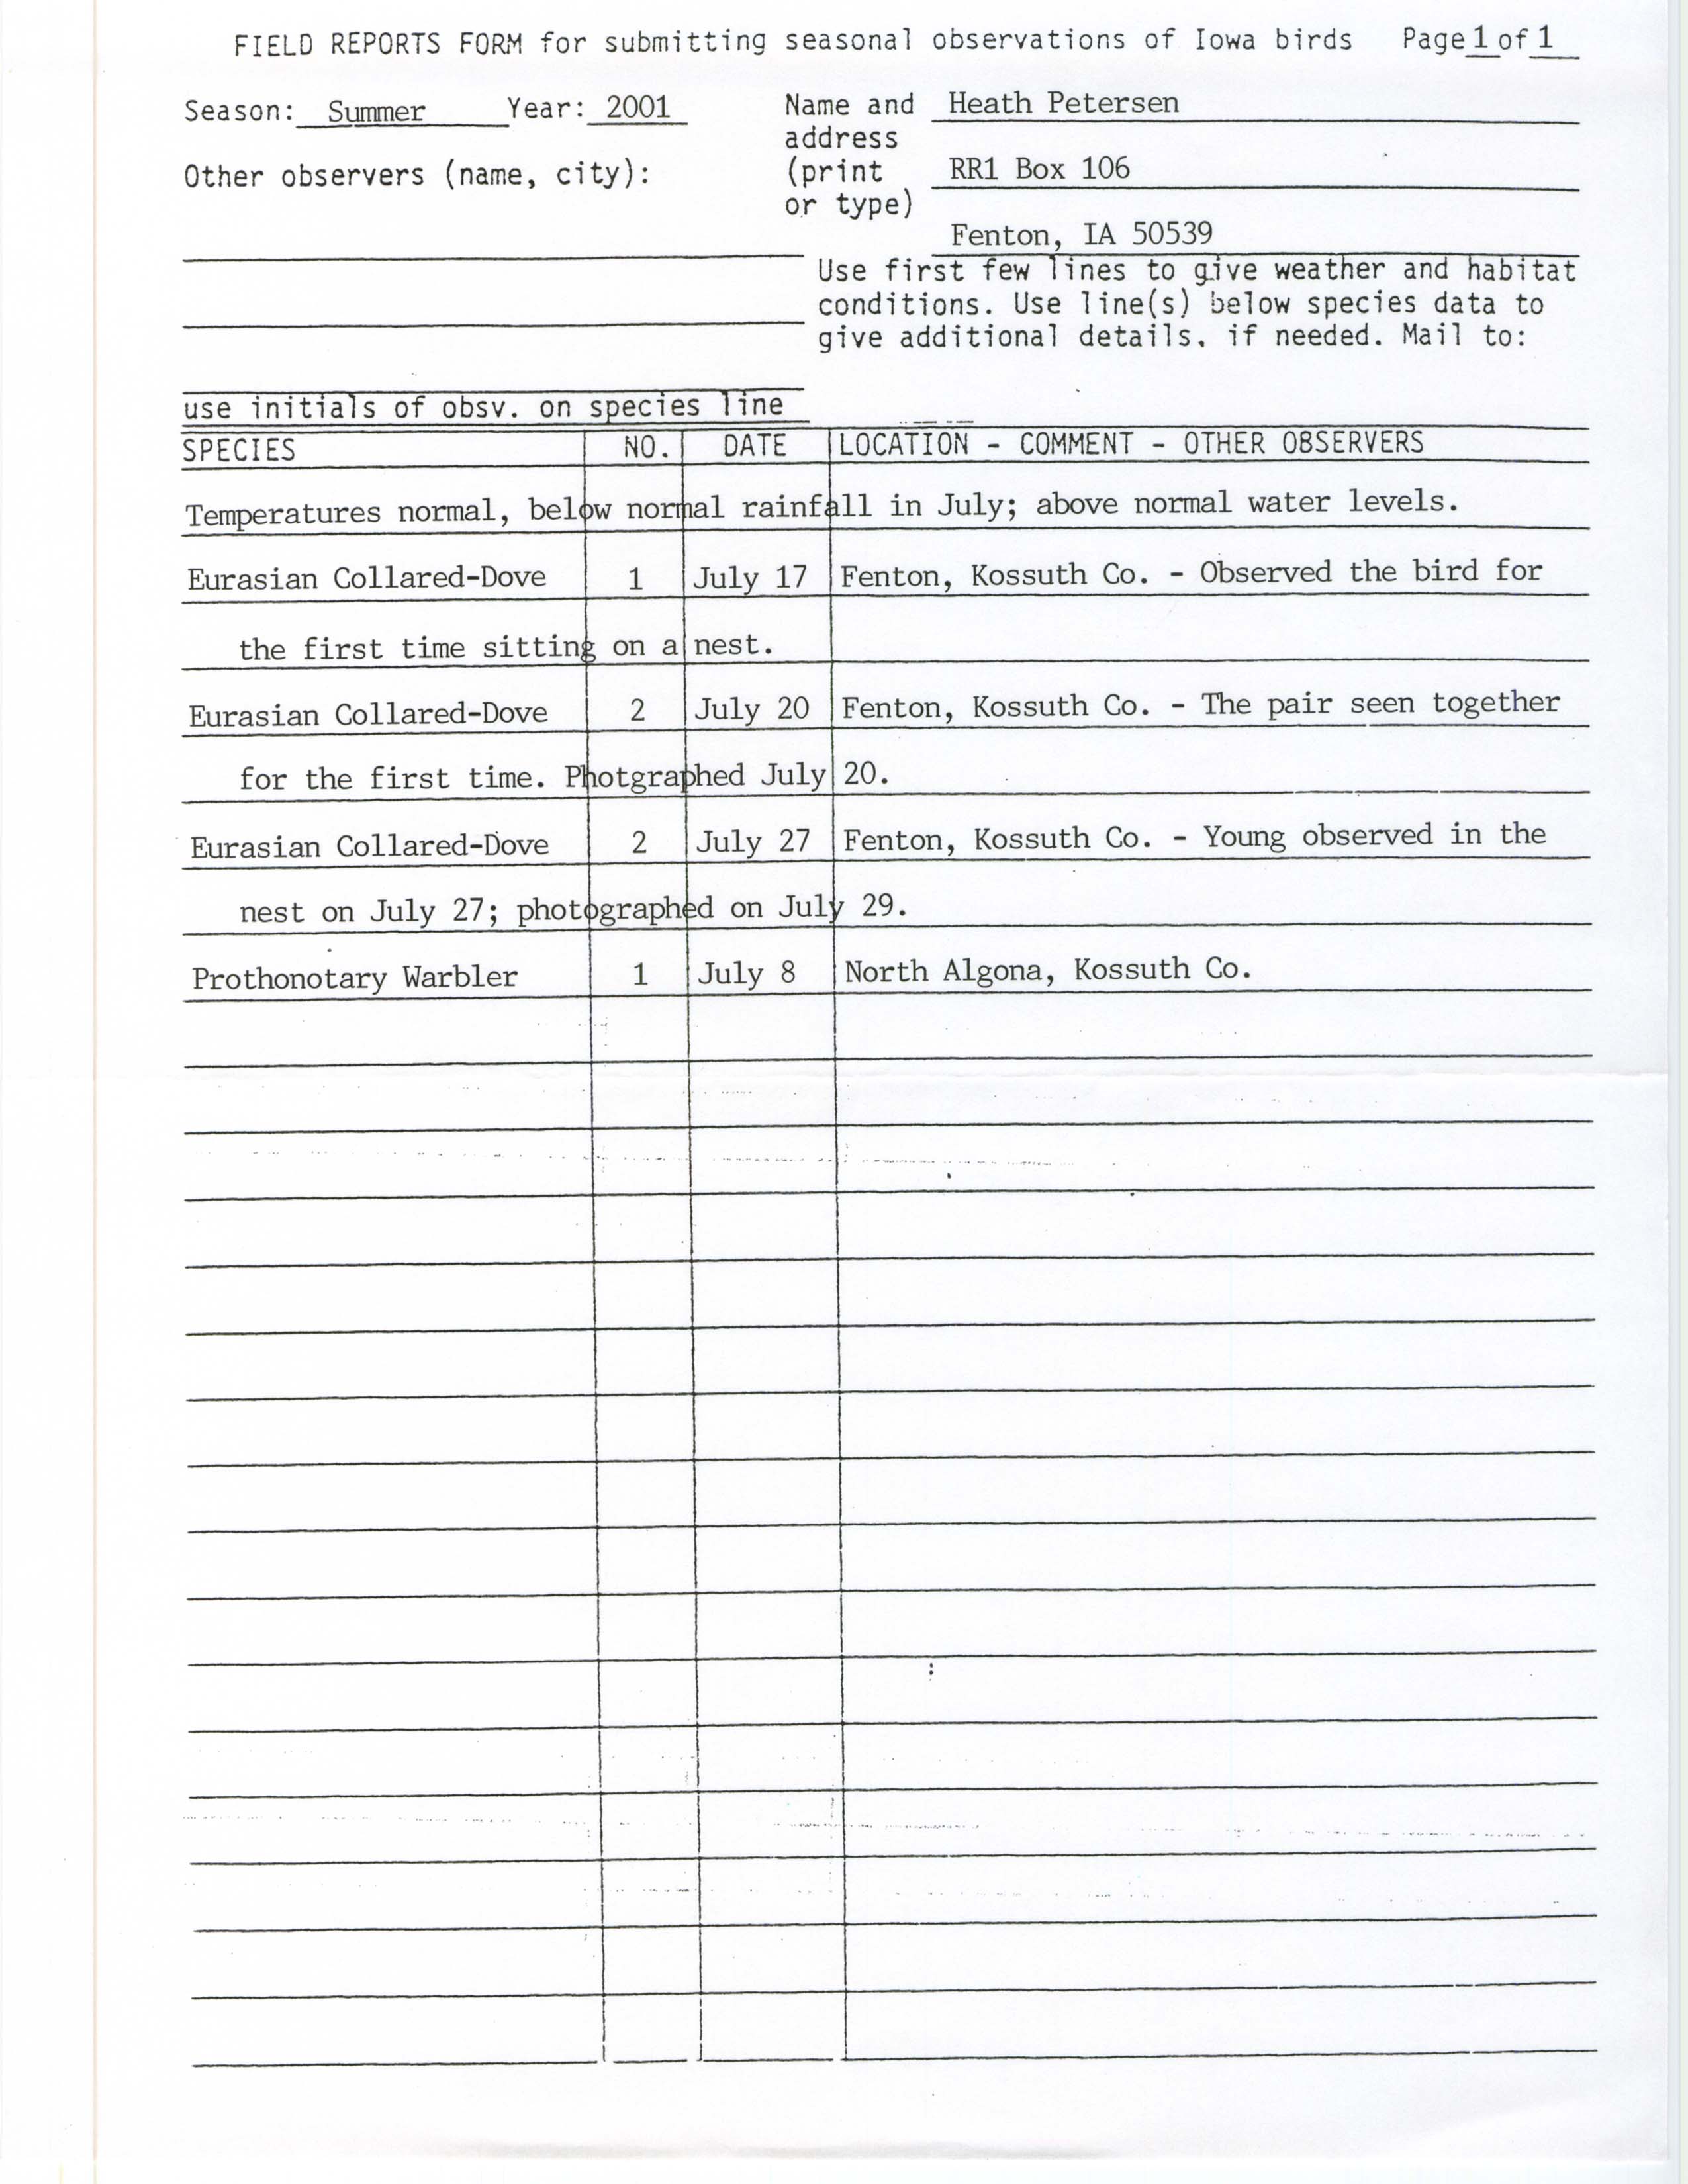 Field reports form for submitting seasonal observations of Iowa birds, Heath Petersen, summer 2001